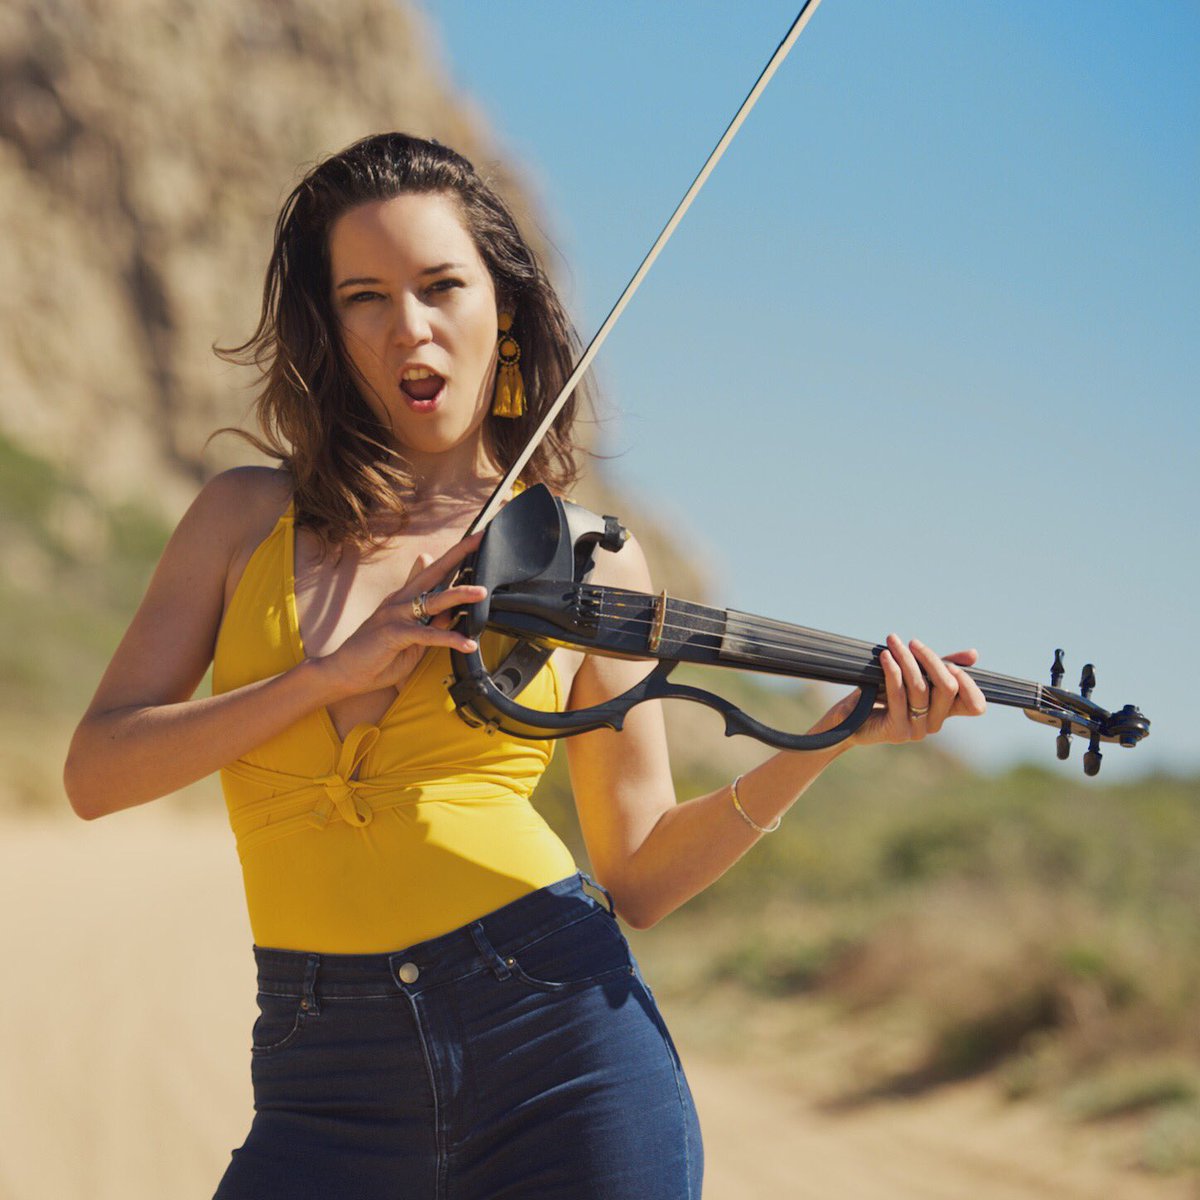 Say what?! 😱 Another video shoot done and dusted - road trippin’ sun soakin’ wine drinkin’ happy weekend vibes to you all☀️ #electricviolin #electricviolinist #youtuber #youtube #summer #adventure #beachcult